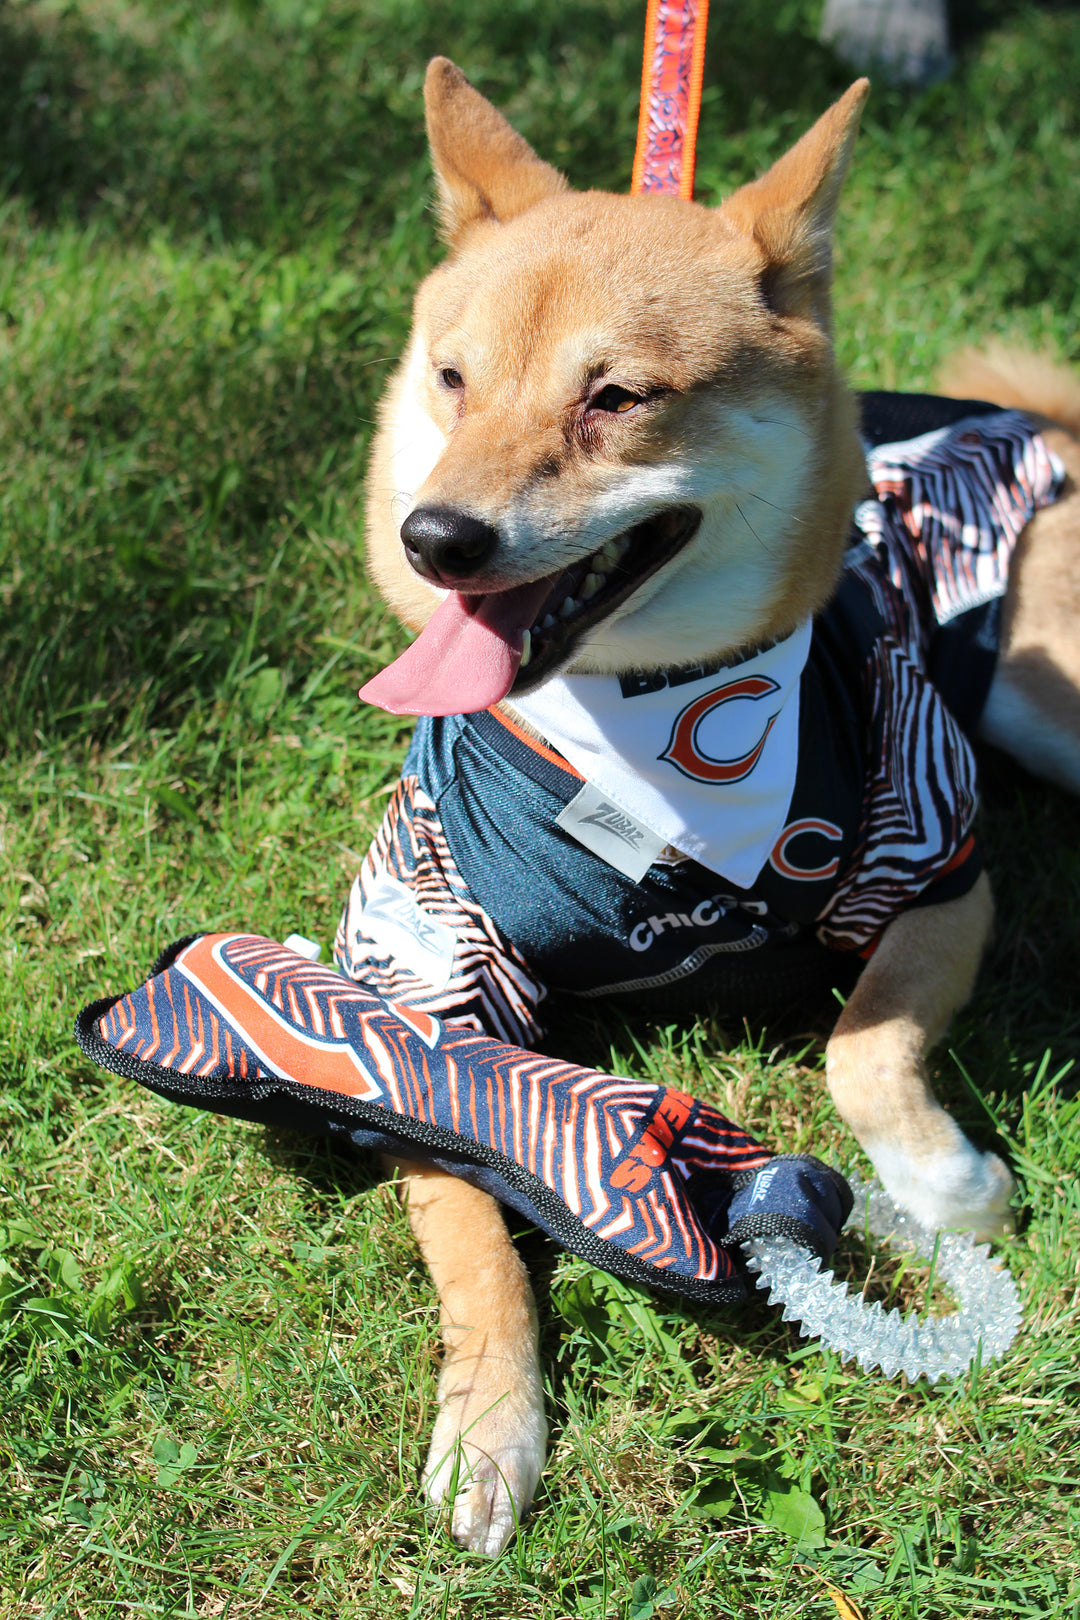 Zubaz X Pets First NFL Houston Texans Team Ring Tug Toy for Pet